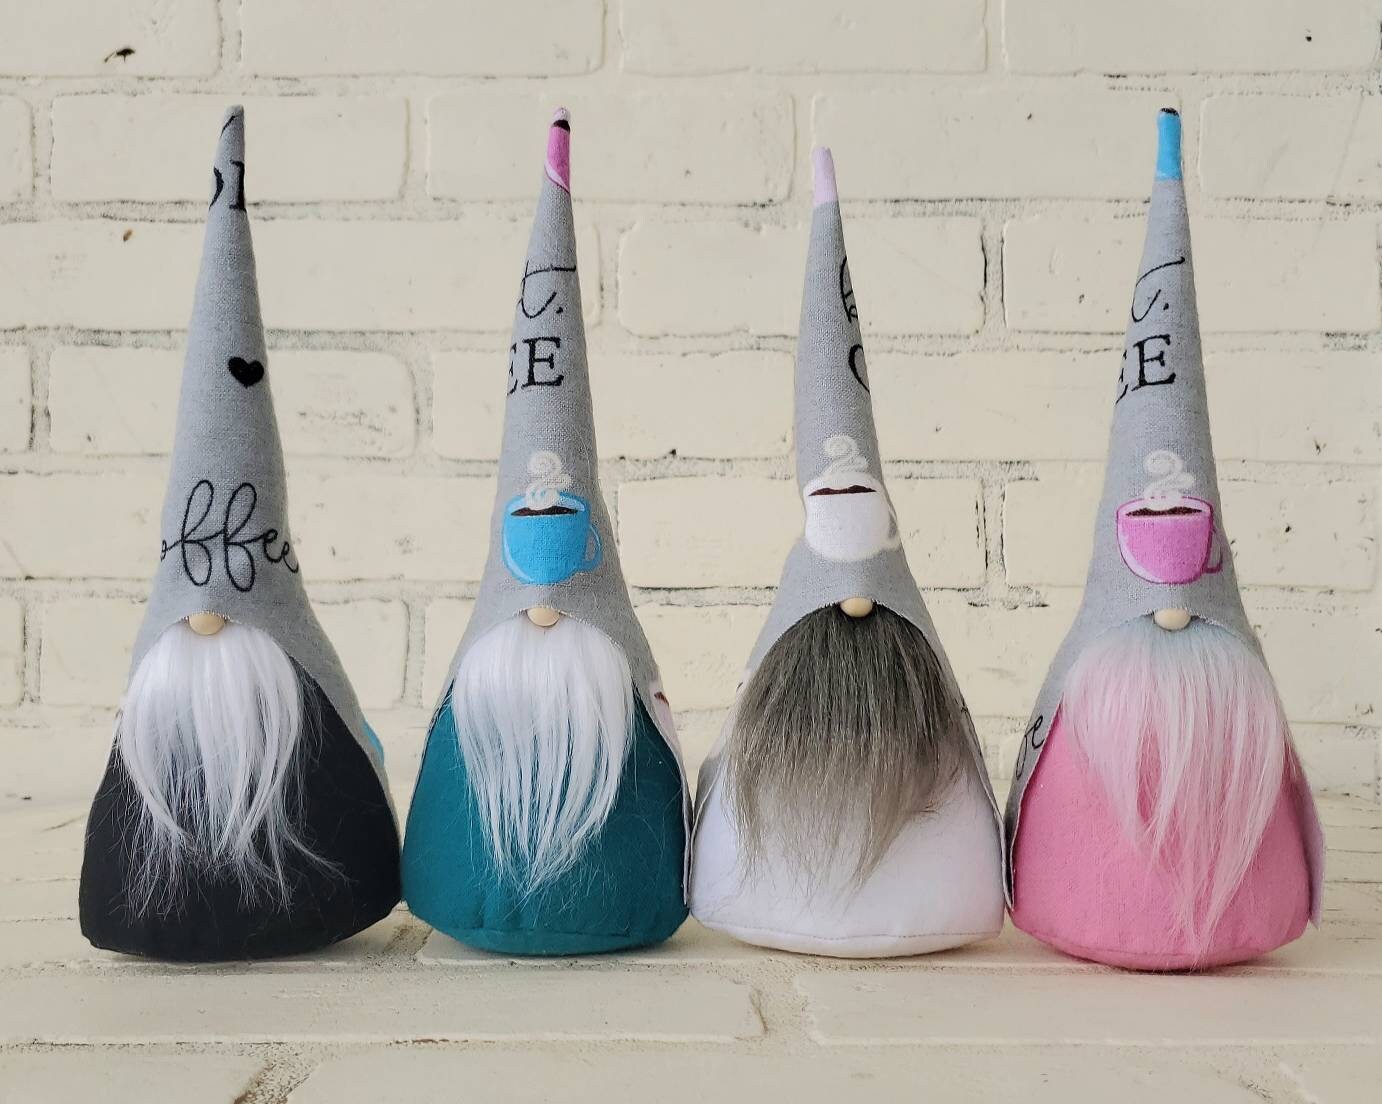 Coffee Gnome collection. With gray hats, adorned with coffee words and cups. In order with White beard and black body, white beard & teal body, gray beard & white body, lastly ombre beard & pink body. These handmade KyElle Kreations gnomes measure 9 inches.. Displayed with faux foliage and seasonal accent decor. 